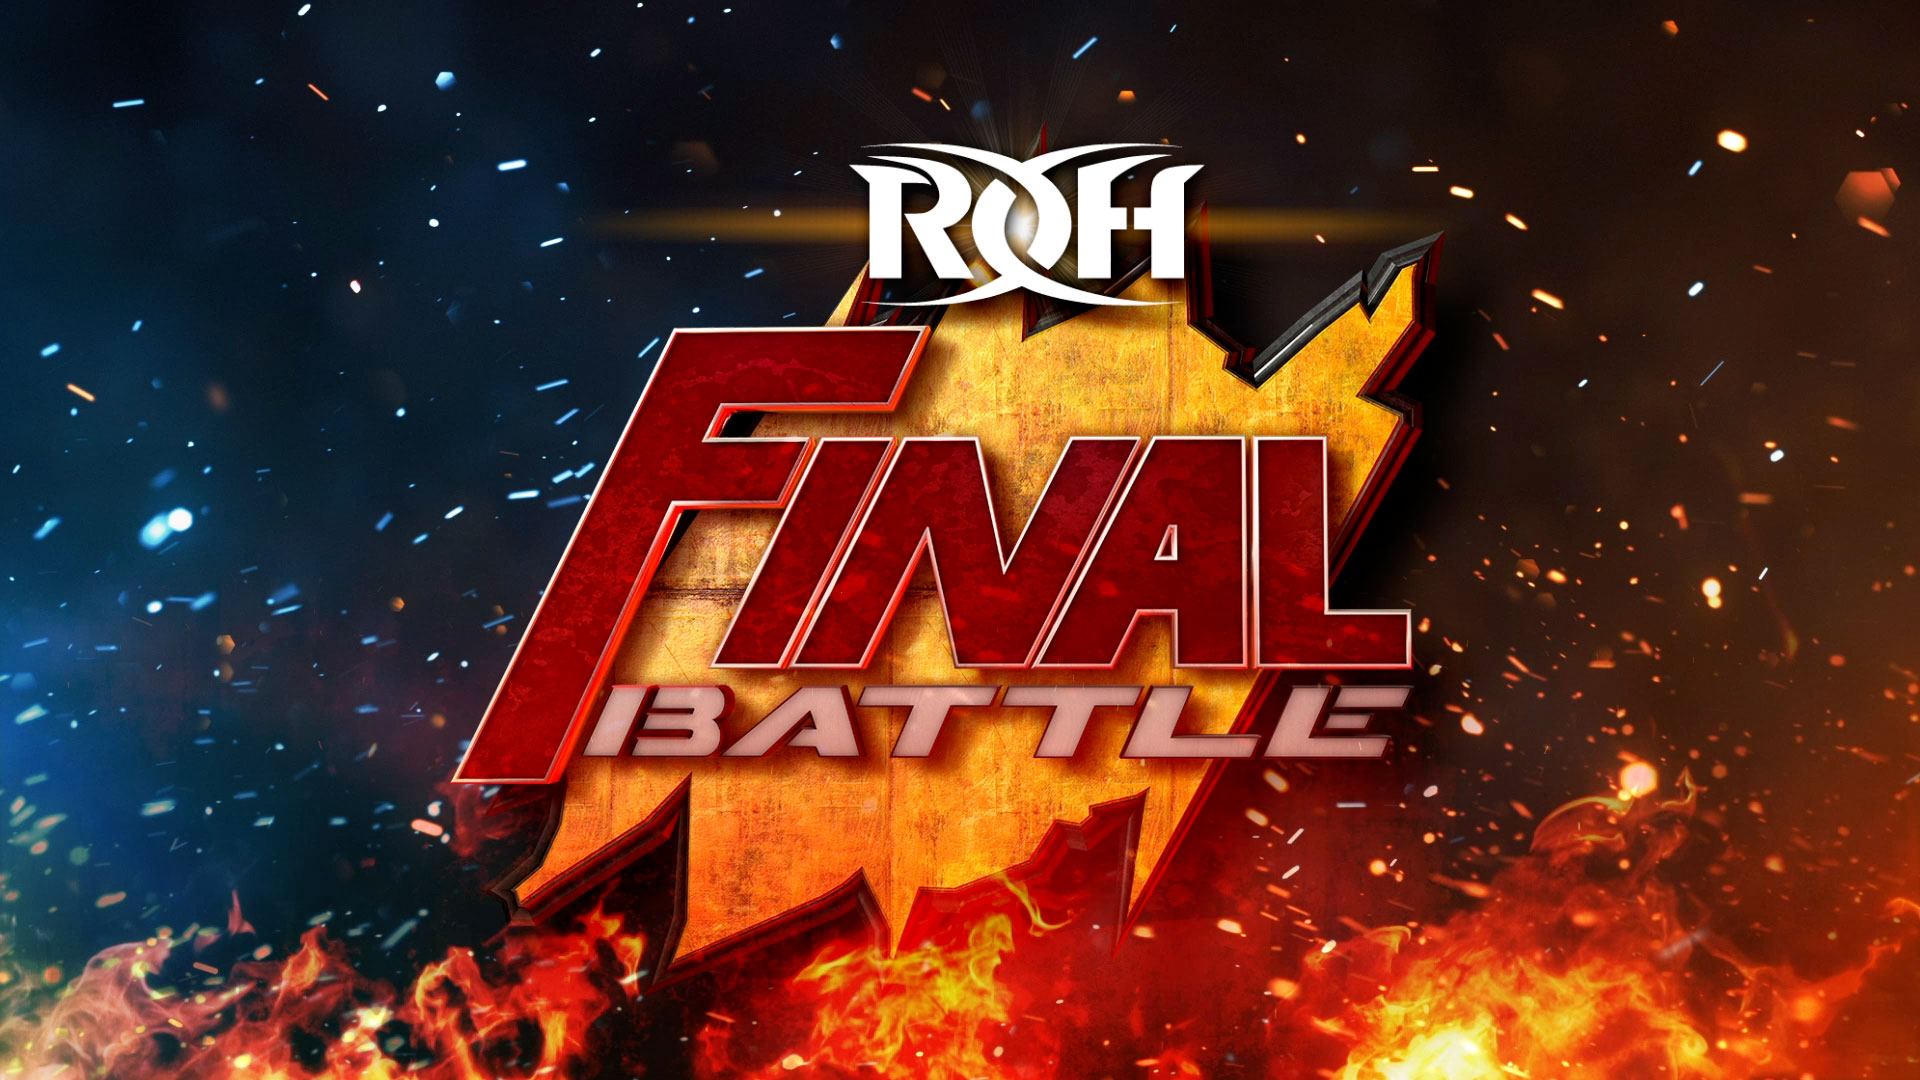 ROH Final Battle PPV at Baltimore’s Chesapeake Employers Insurance Arena Set For Dec 11